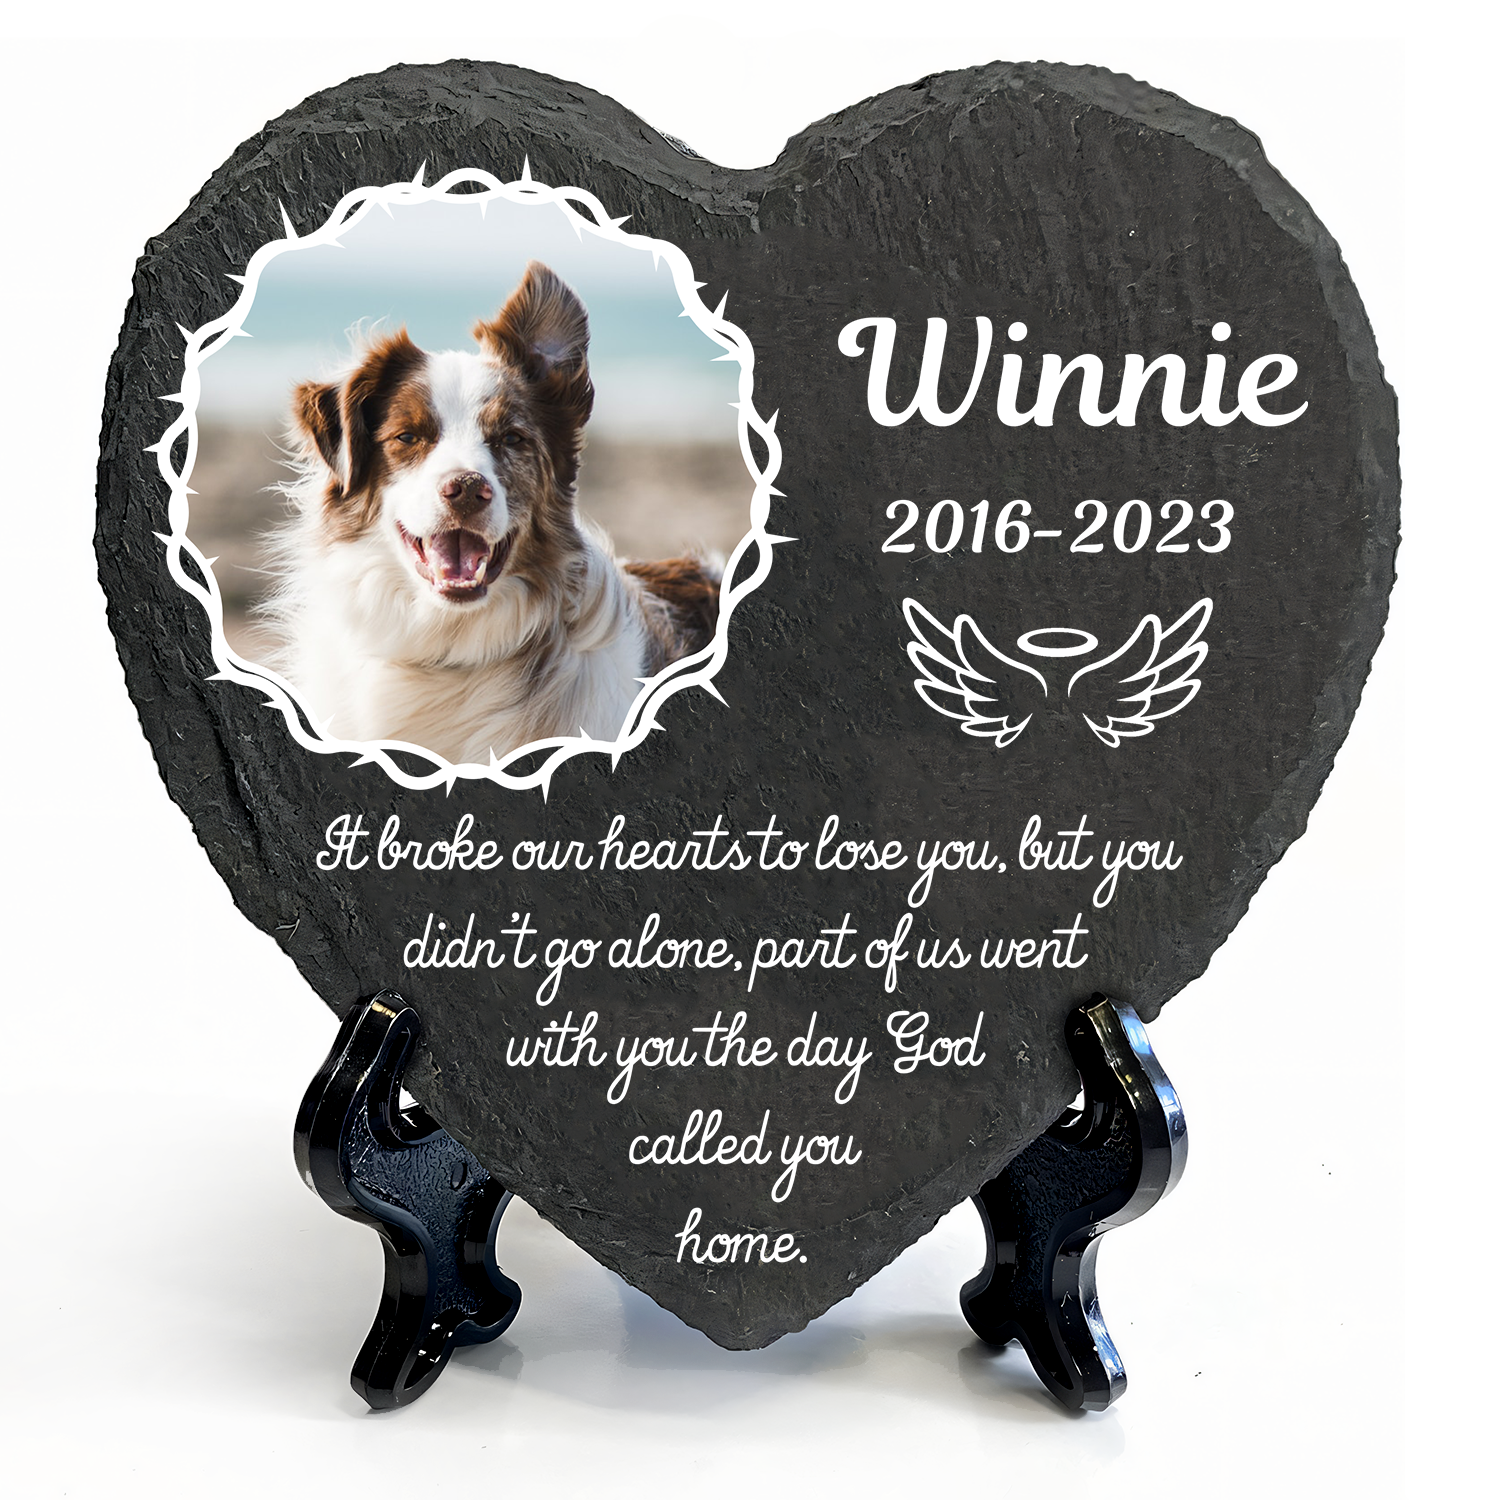 Crown Of Thorns It Broke Our Heart To Lose You Custom Dog Memorial Stone, Pet Memorial Gifts - Personalized Custom Memorial Tombstone